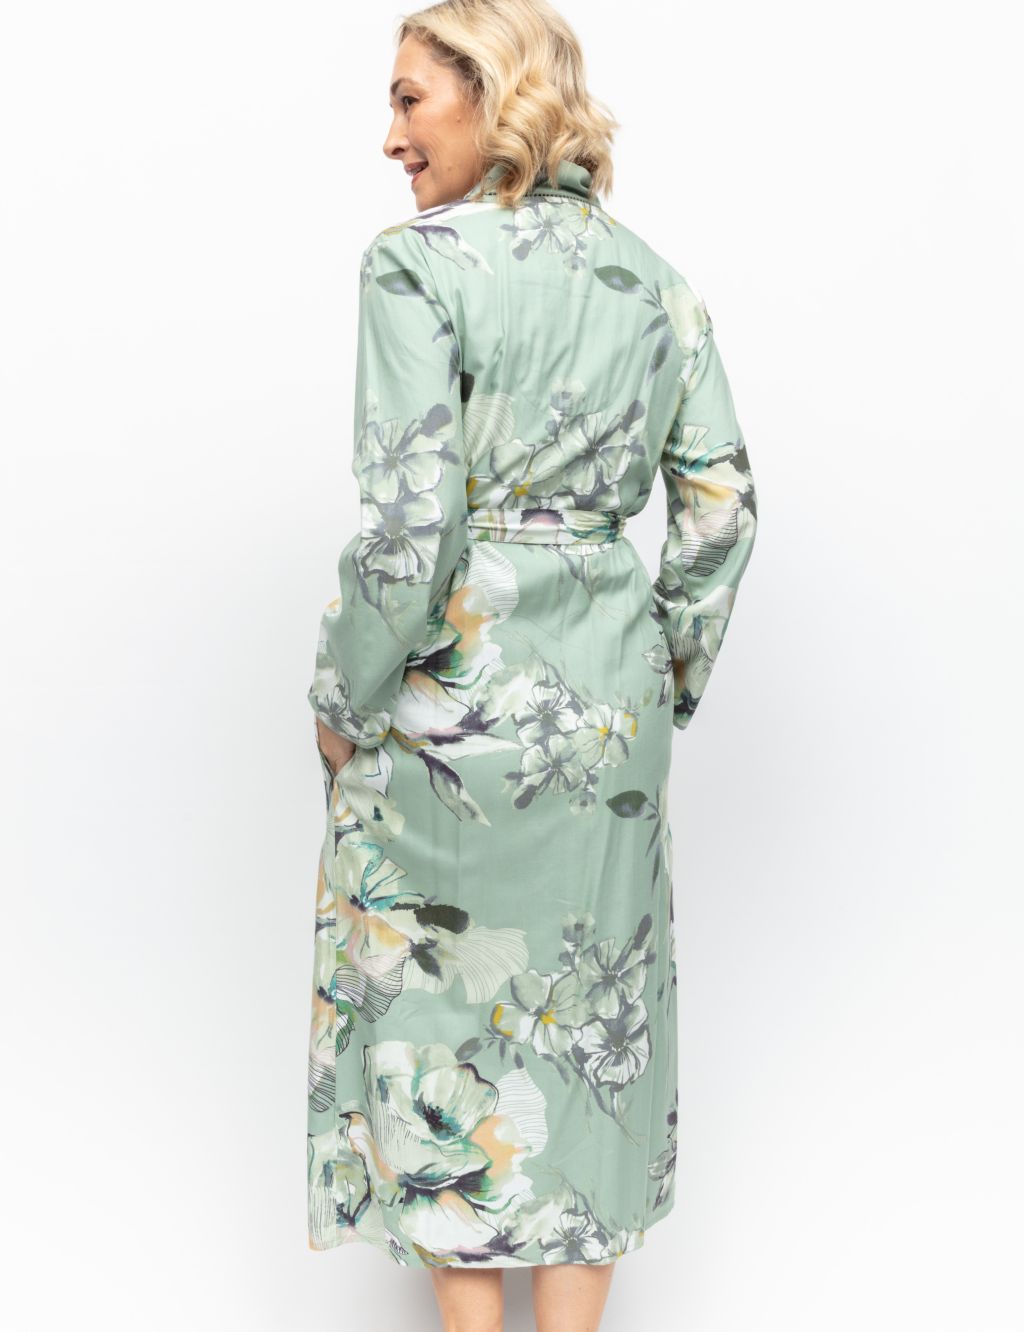 Cotton Modal Floral Dressing Gown image 3